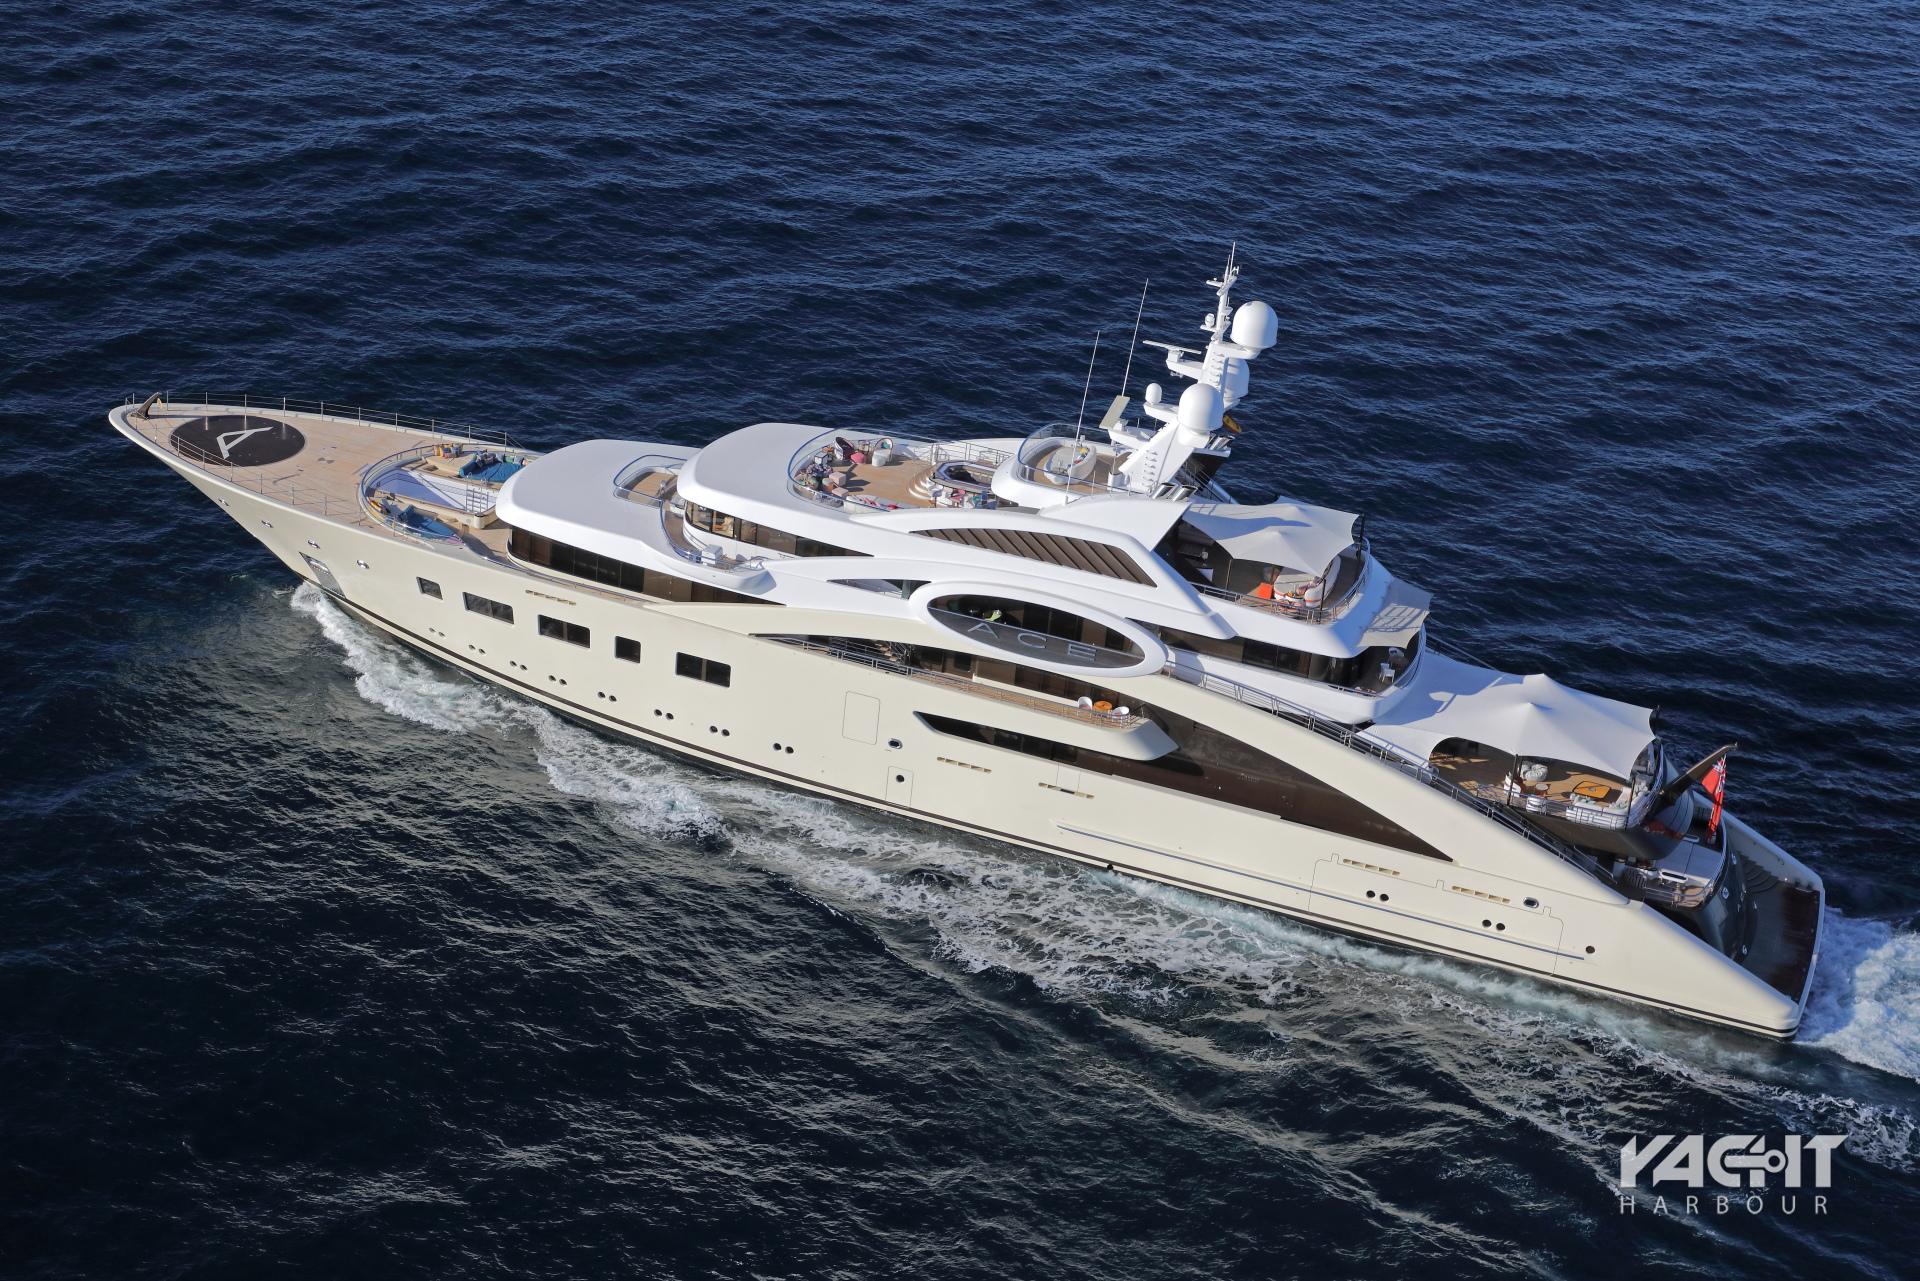 motor yacht ace sold